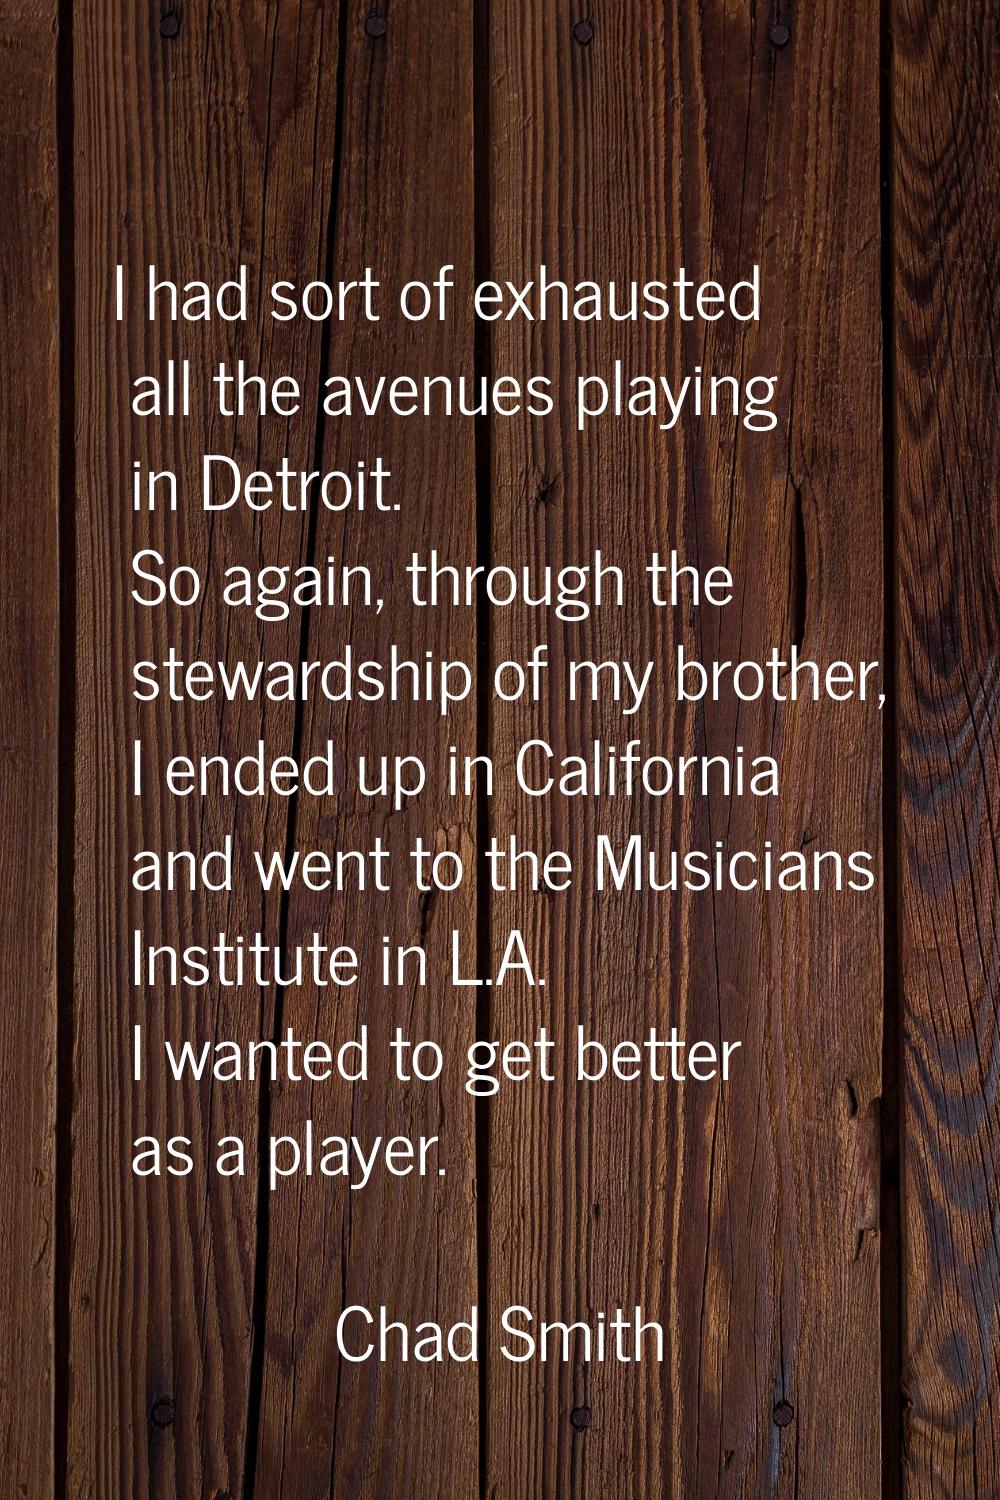 I had sort of exhausted all the avenues playing in Detroit. So again, through the stewardship of my